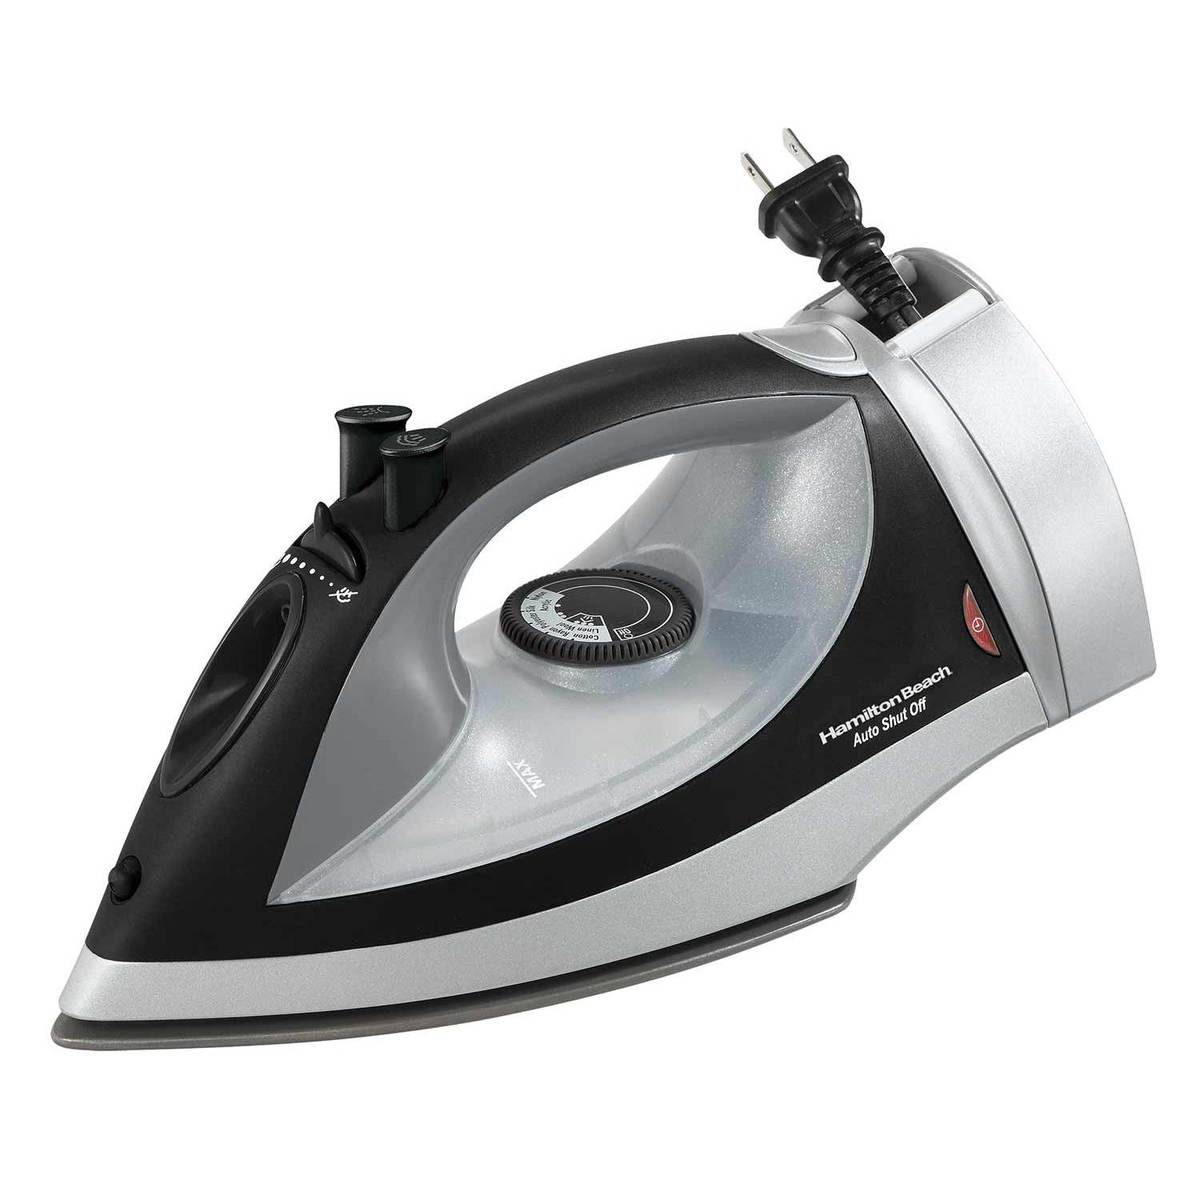 Nonstick Iron with Retractable Cord (14210Z)